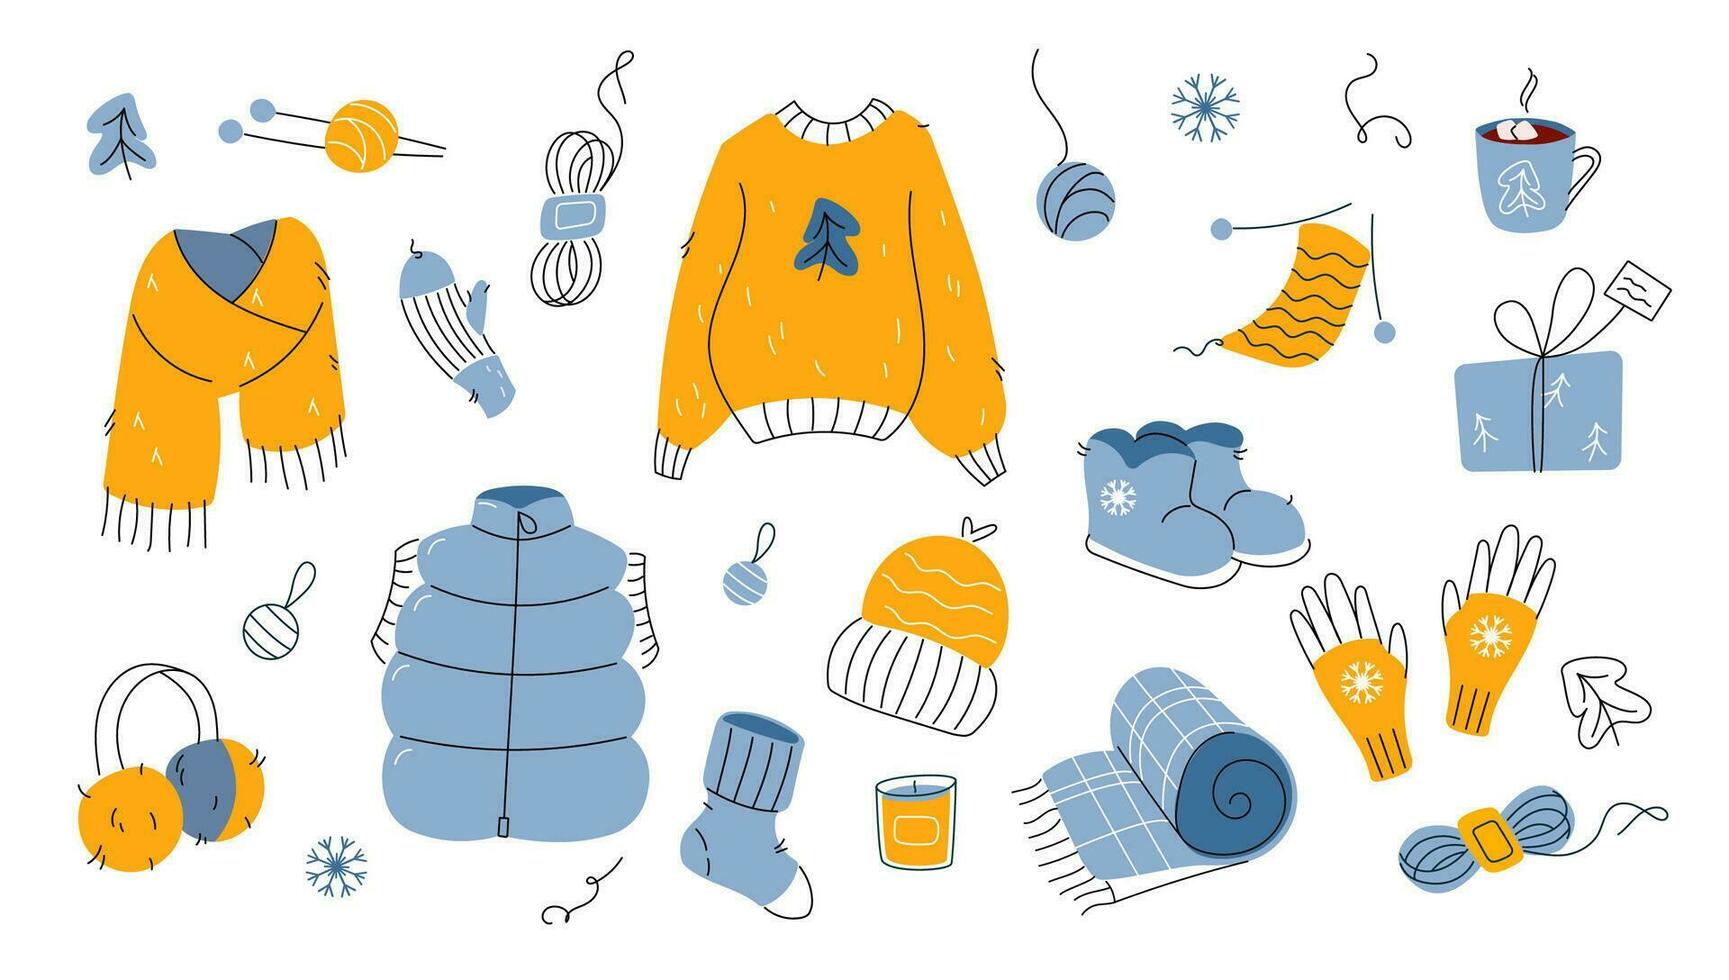 Winter warm and knitted clothes set cold weather with holiday decor. Sweater, scarf, knitted hat and mittens, down vest, boots, hot drink and yarn. Doodle hand drawn style elements on white background vector